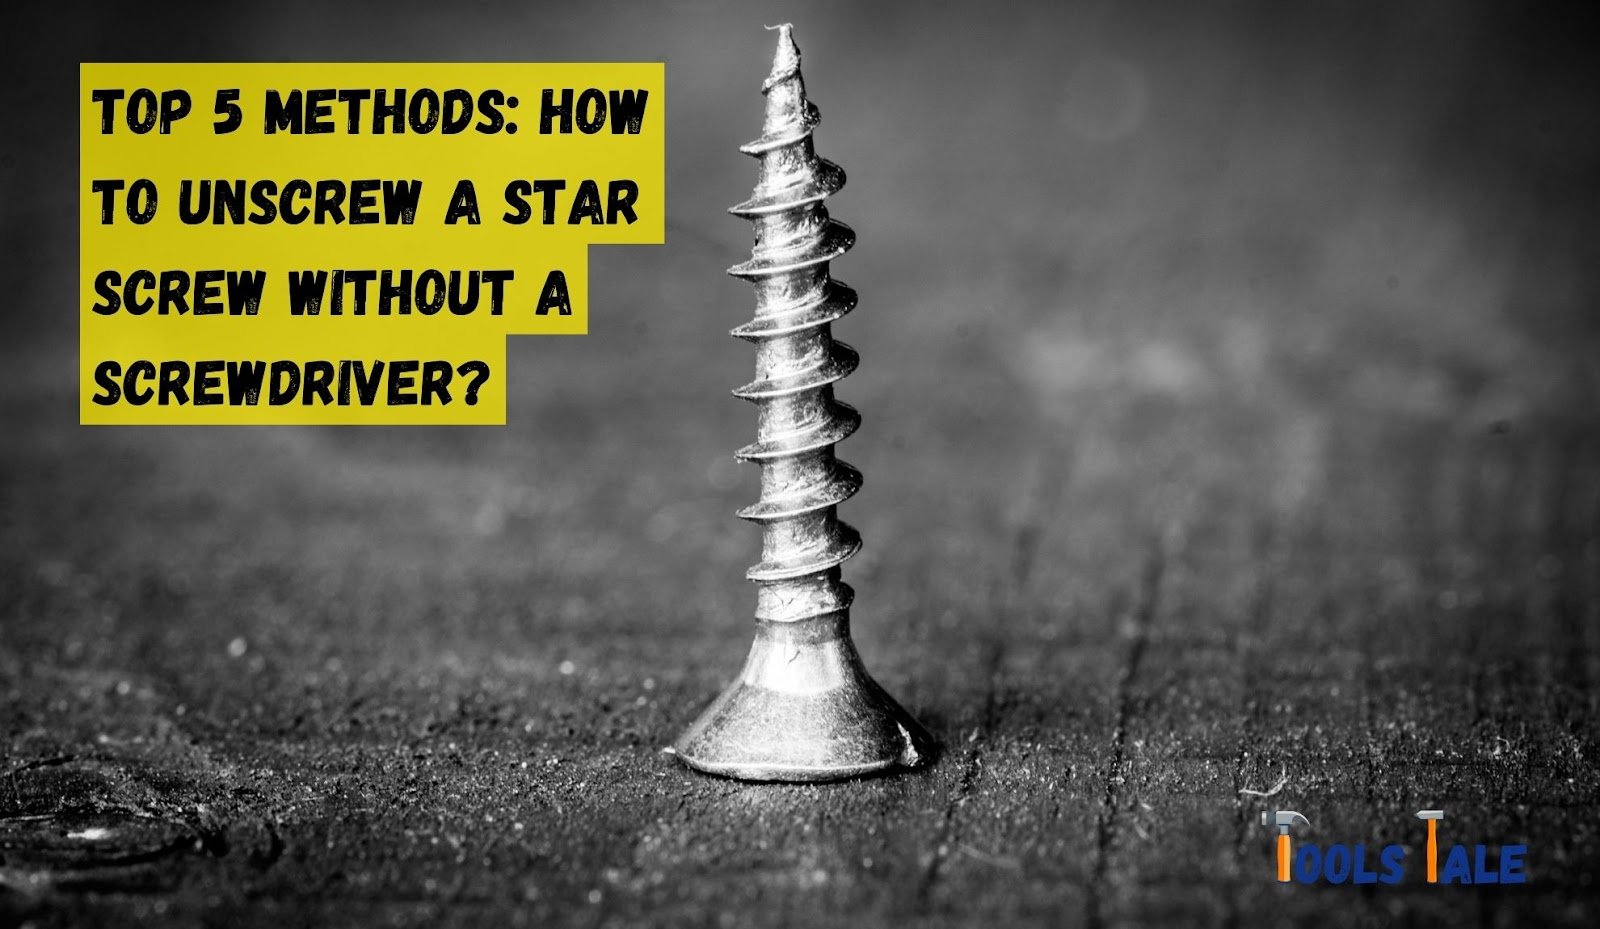 How to Unscrew a Star Screw Without a Screwdriver